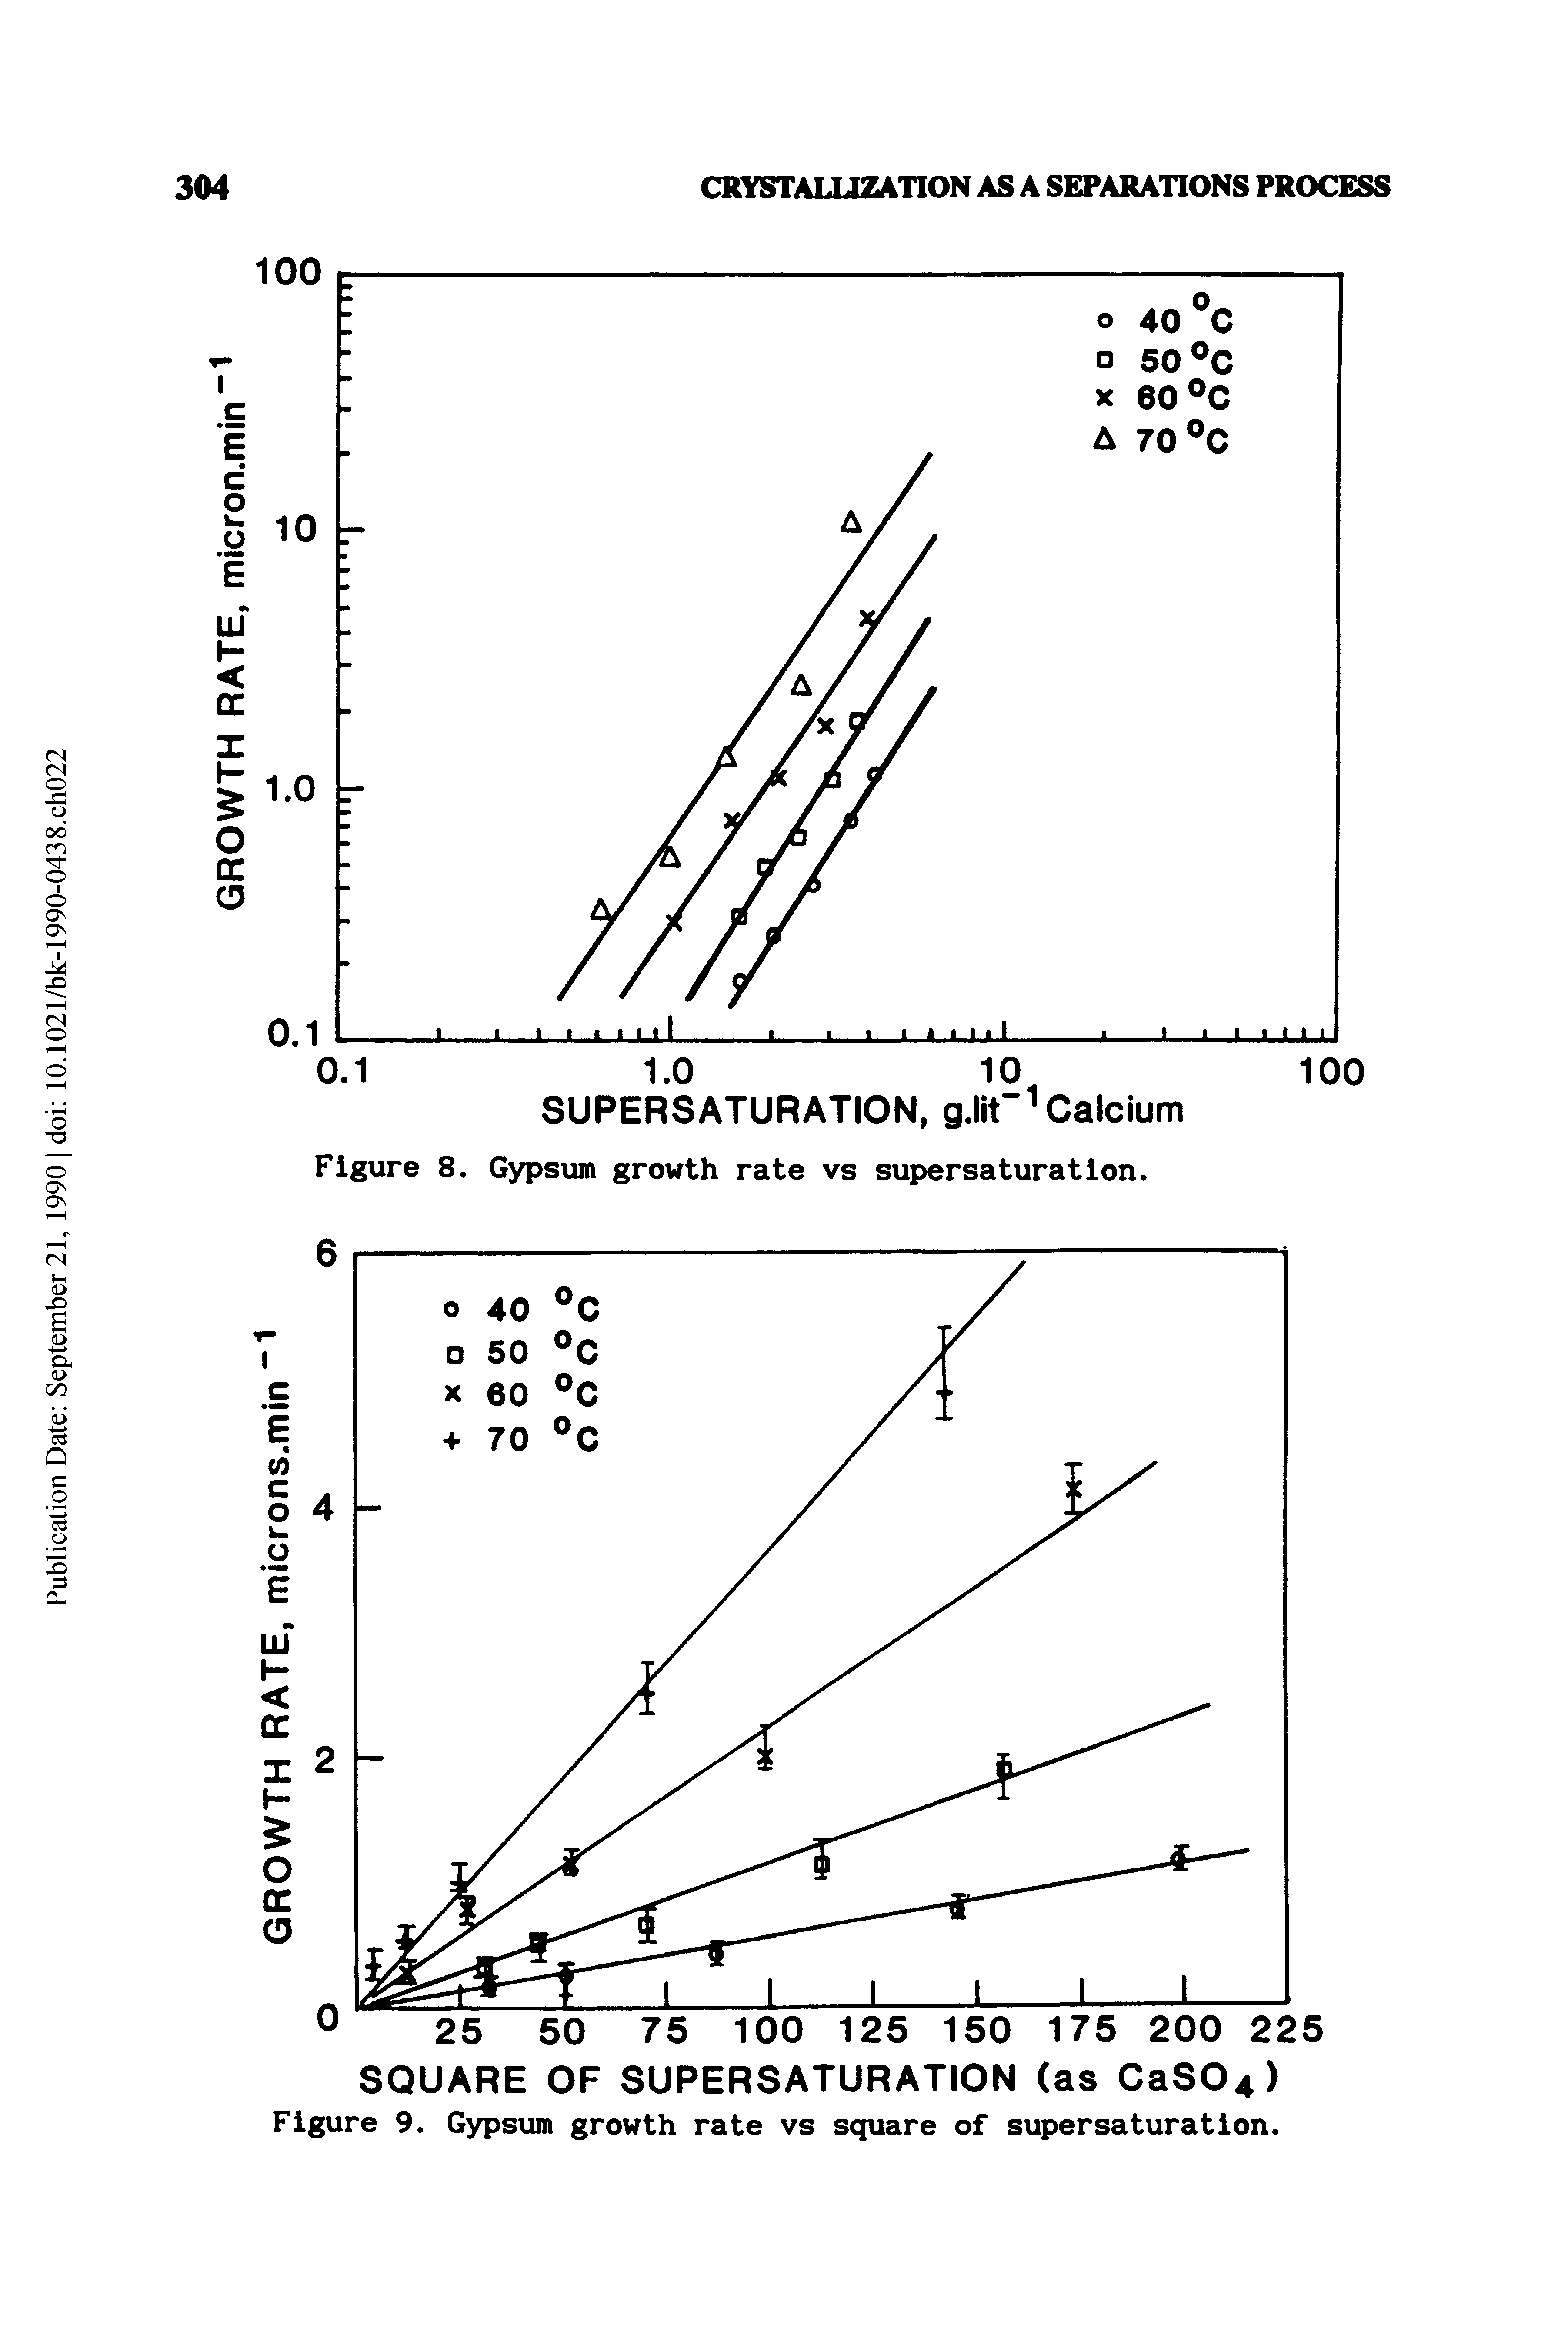 Figure 9. Gypsum growth rate vs square of supersaturation.